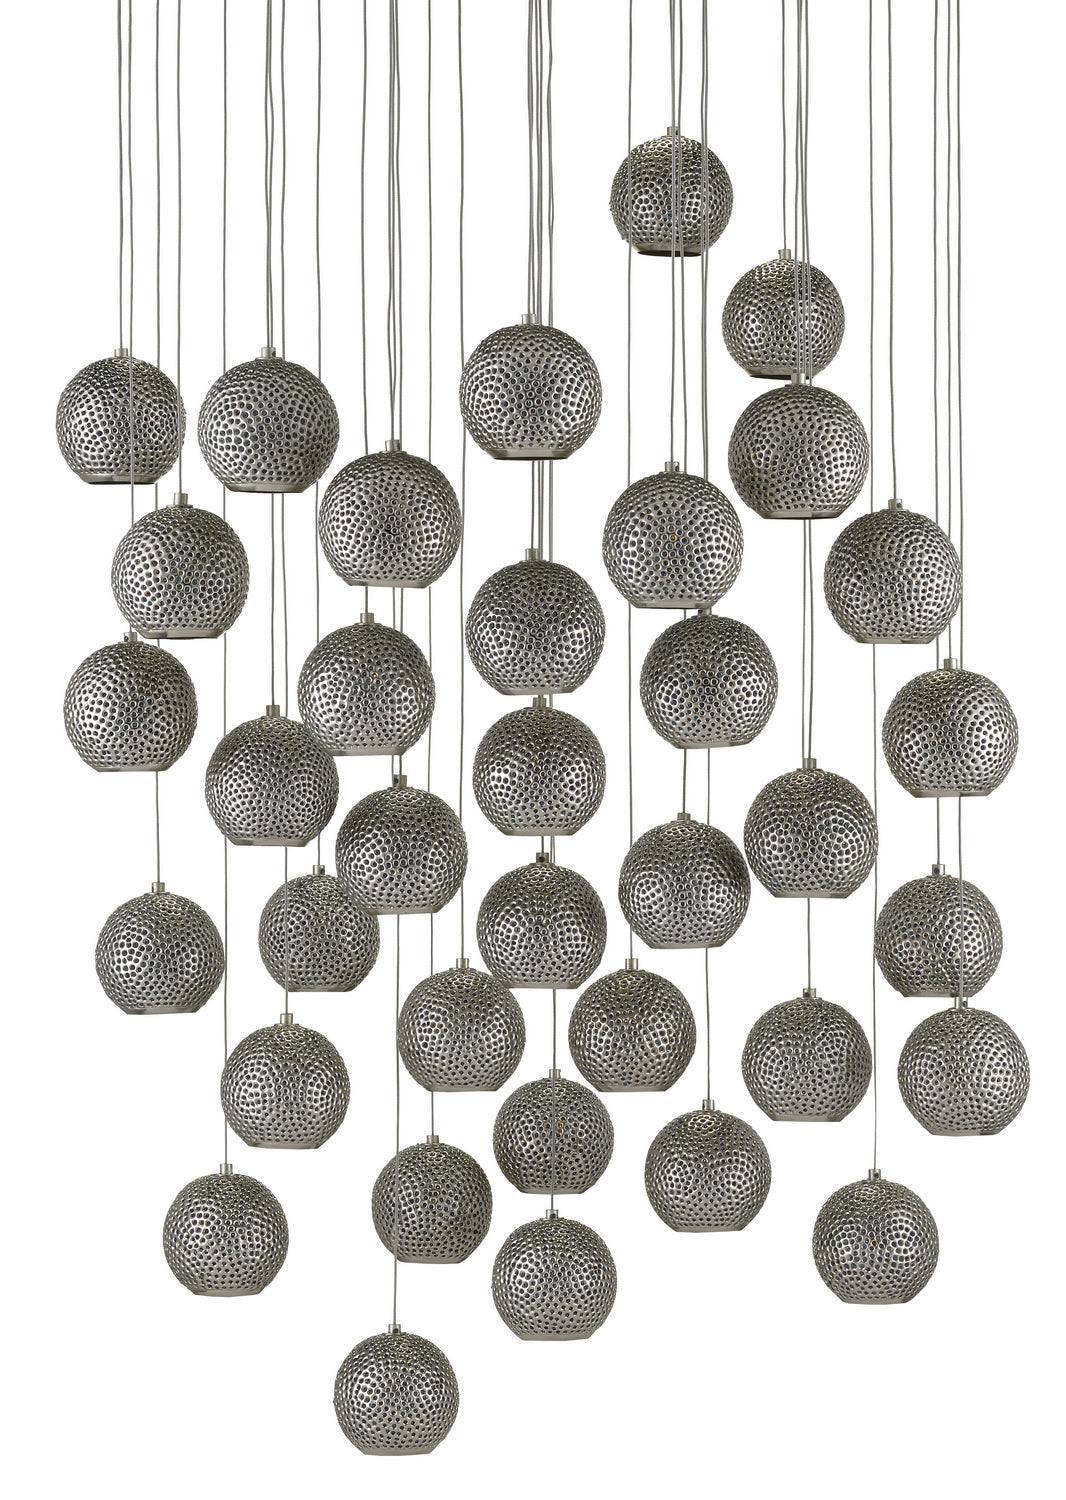 36 Light Pendant from the Giro collection in Painted Silver/Nickel/Blue finish